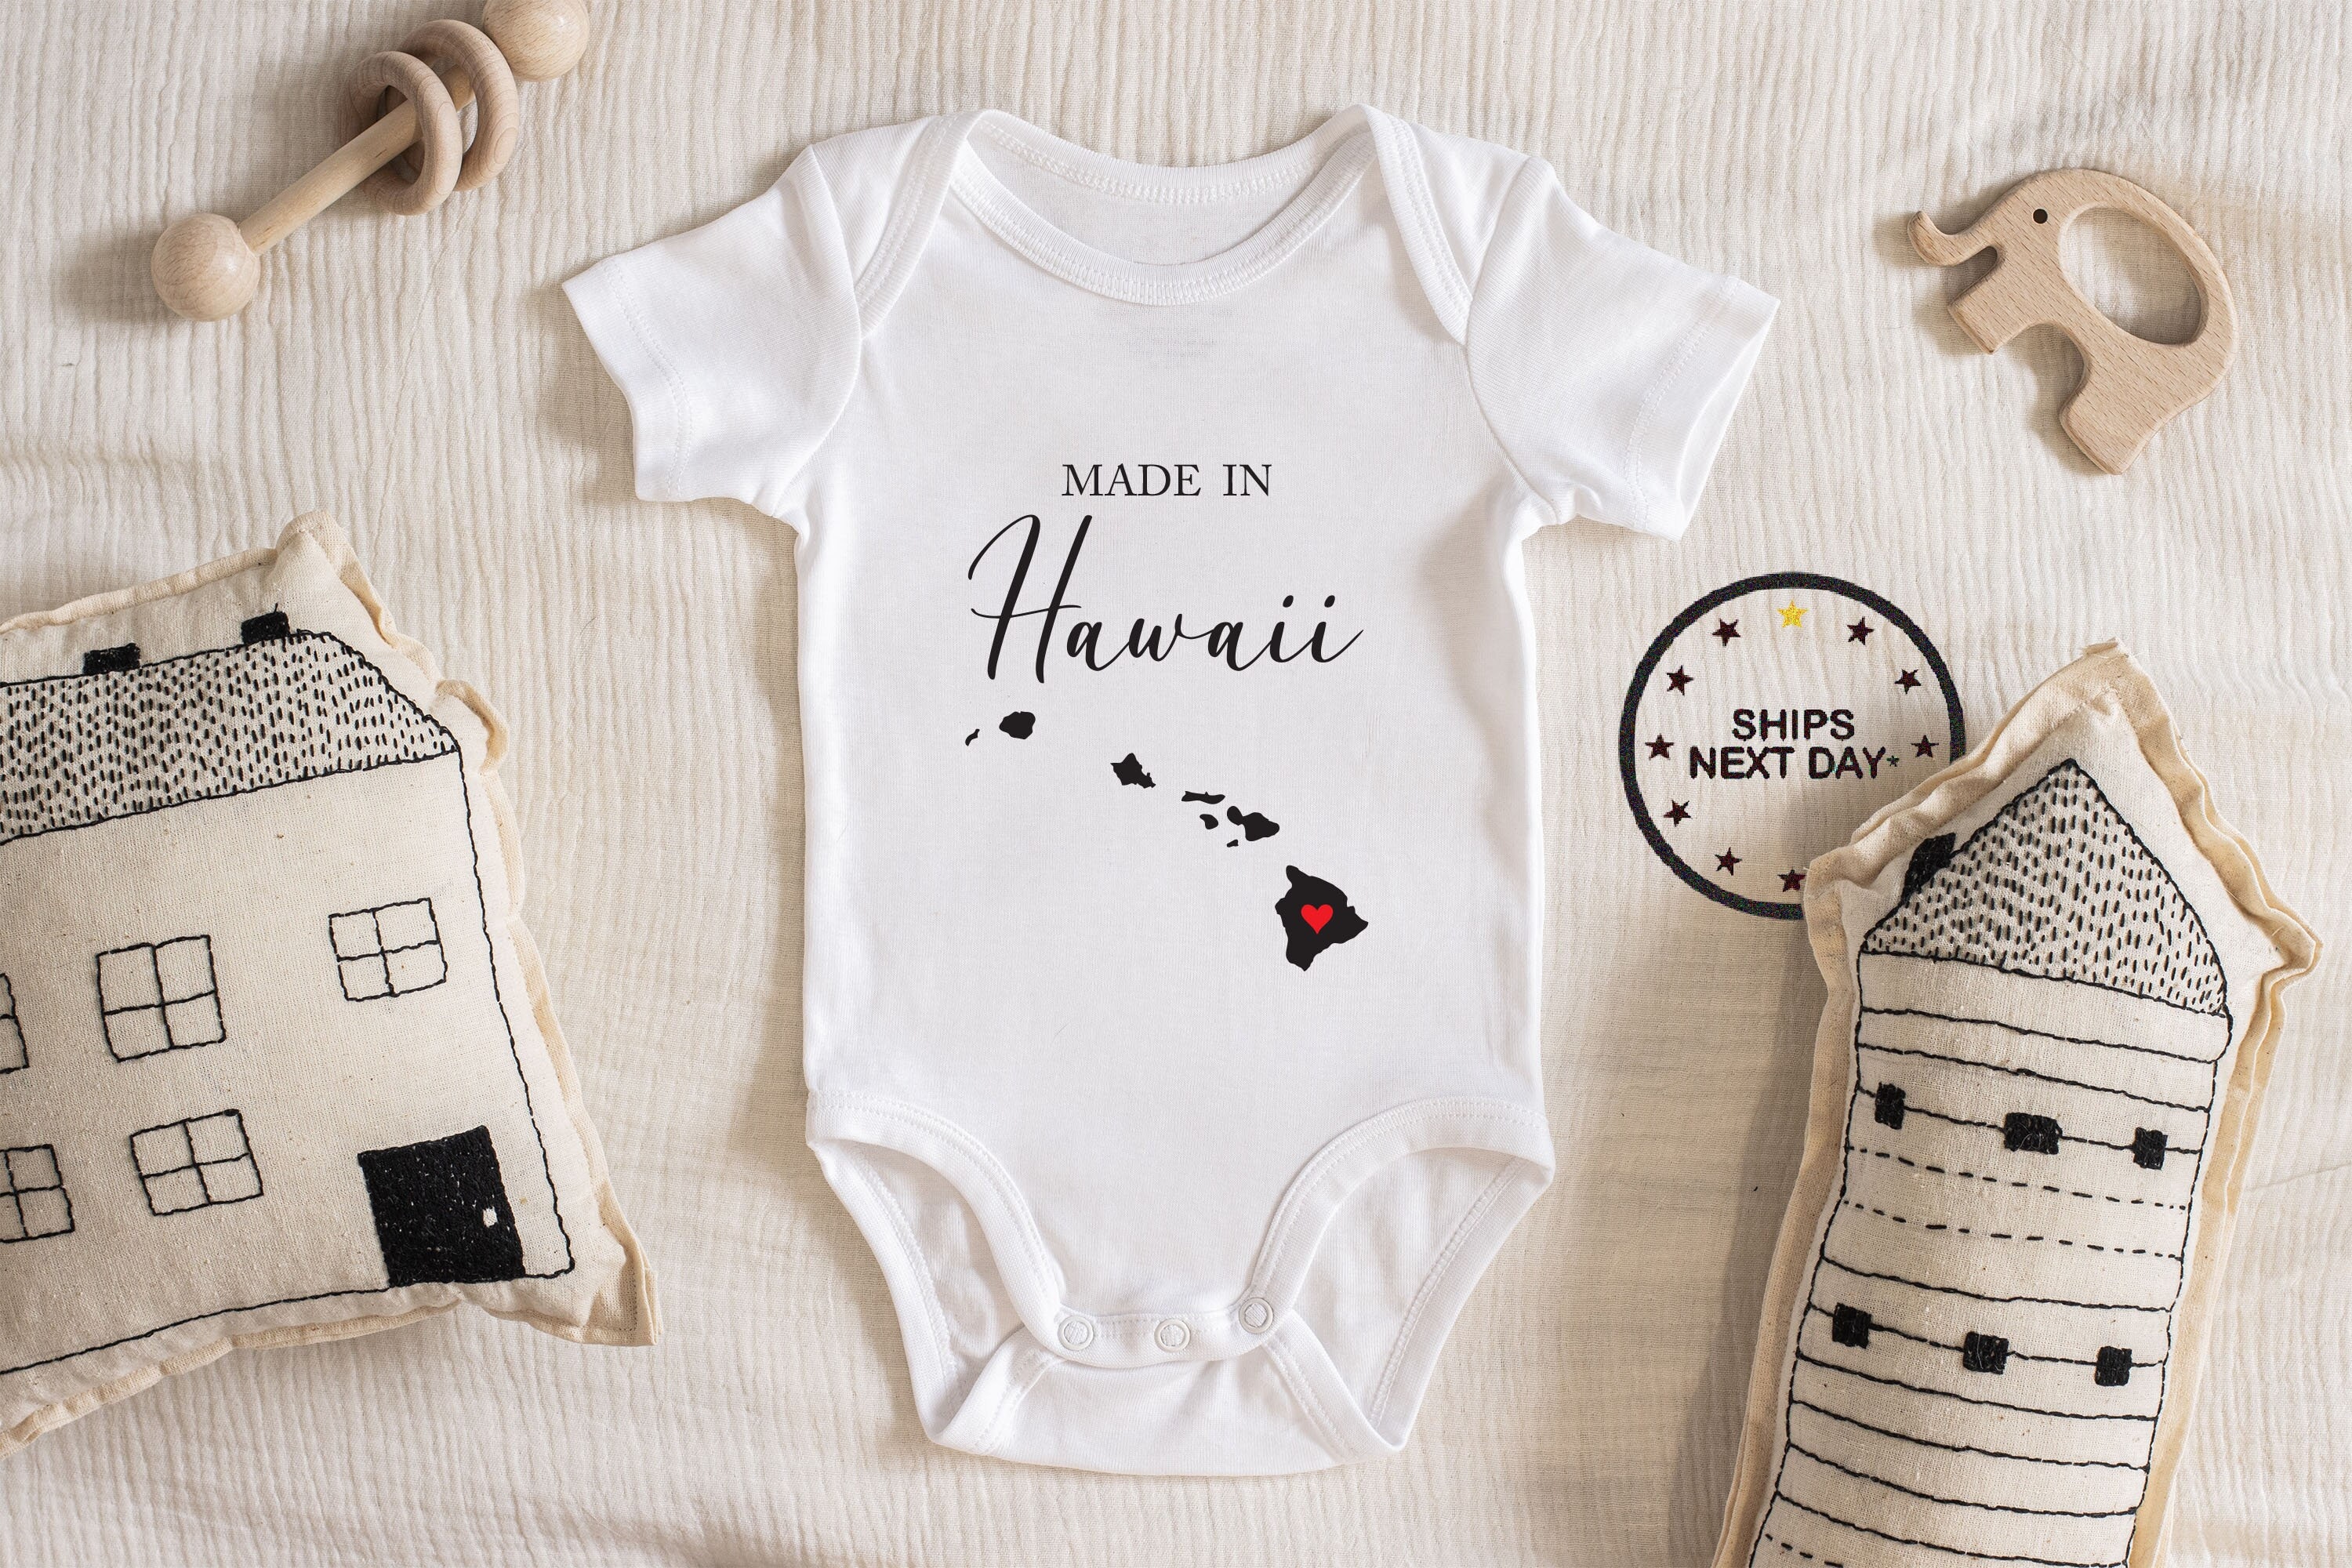  Creative Knitwear University of Hawaii Baby Bodysuit: Clothing,  Shoes & Jewelry